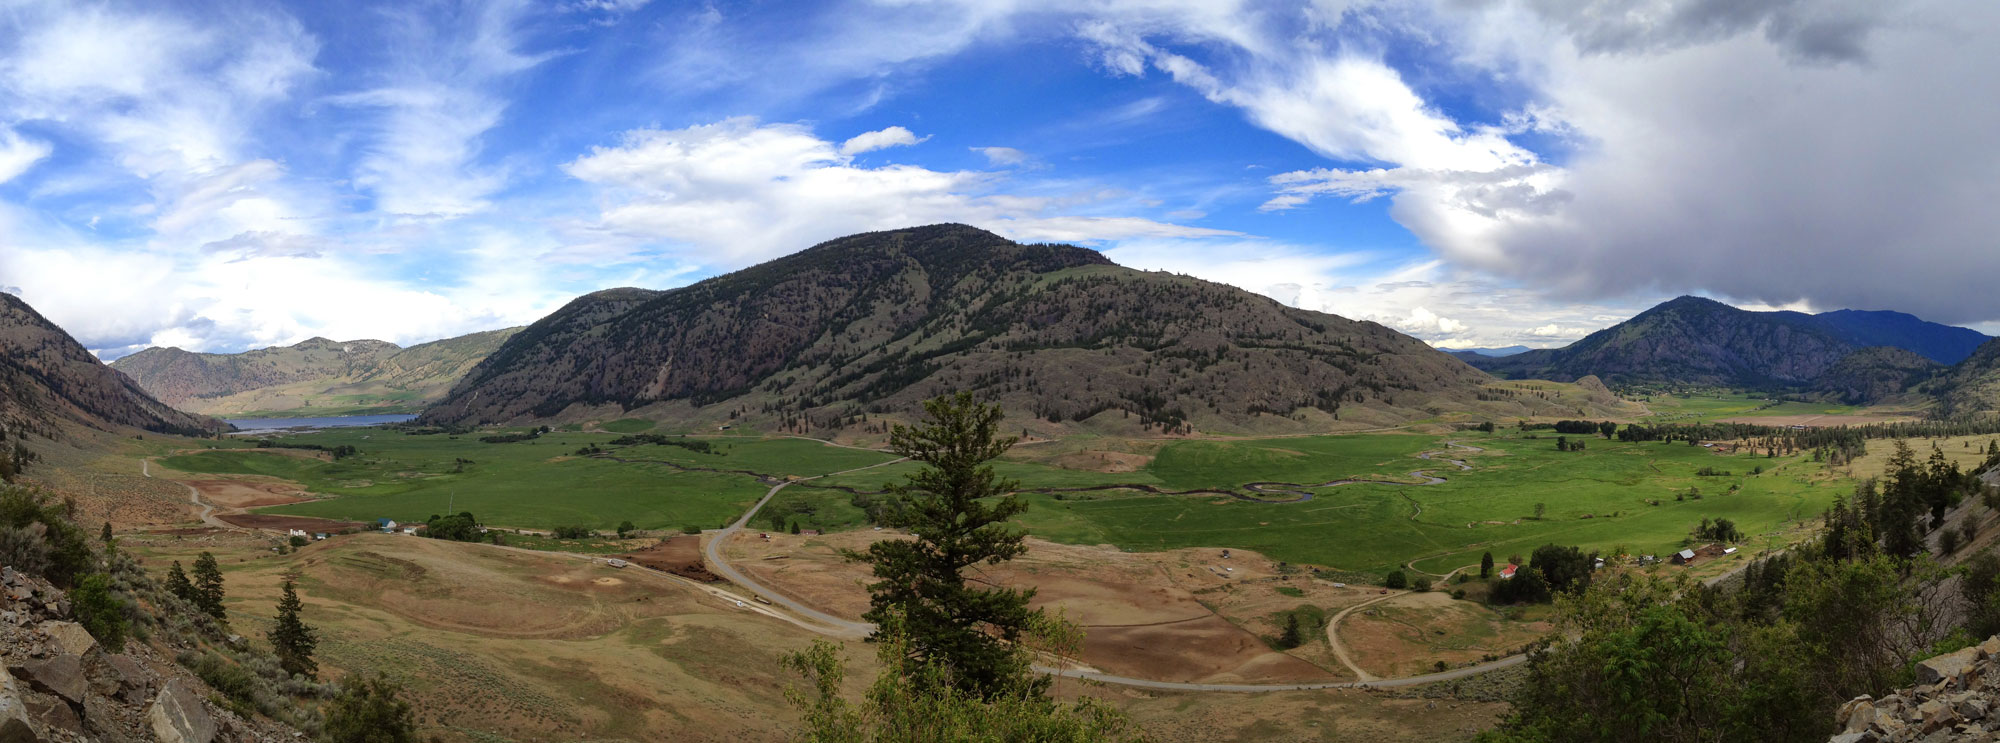 Photograph of Sinlahekin Valley, Okanogan Highlands, northeastern Washington. The photo shows a rounded hill with a river valley at its base. Additional hills rise in the background.